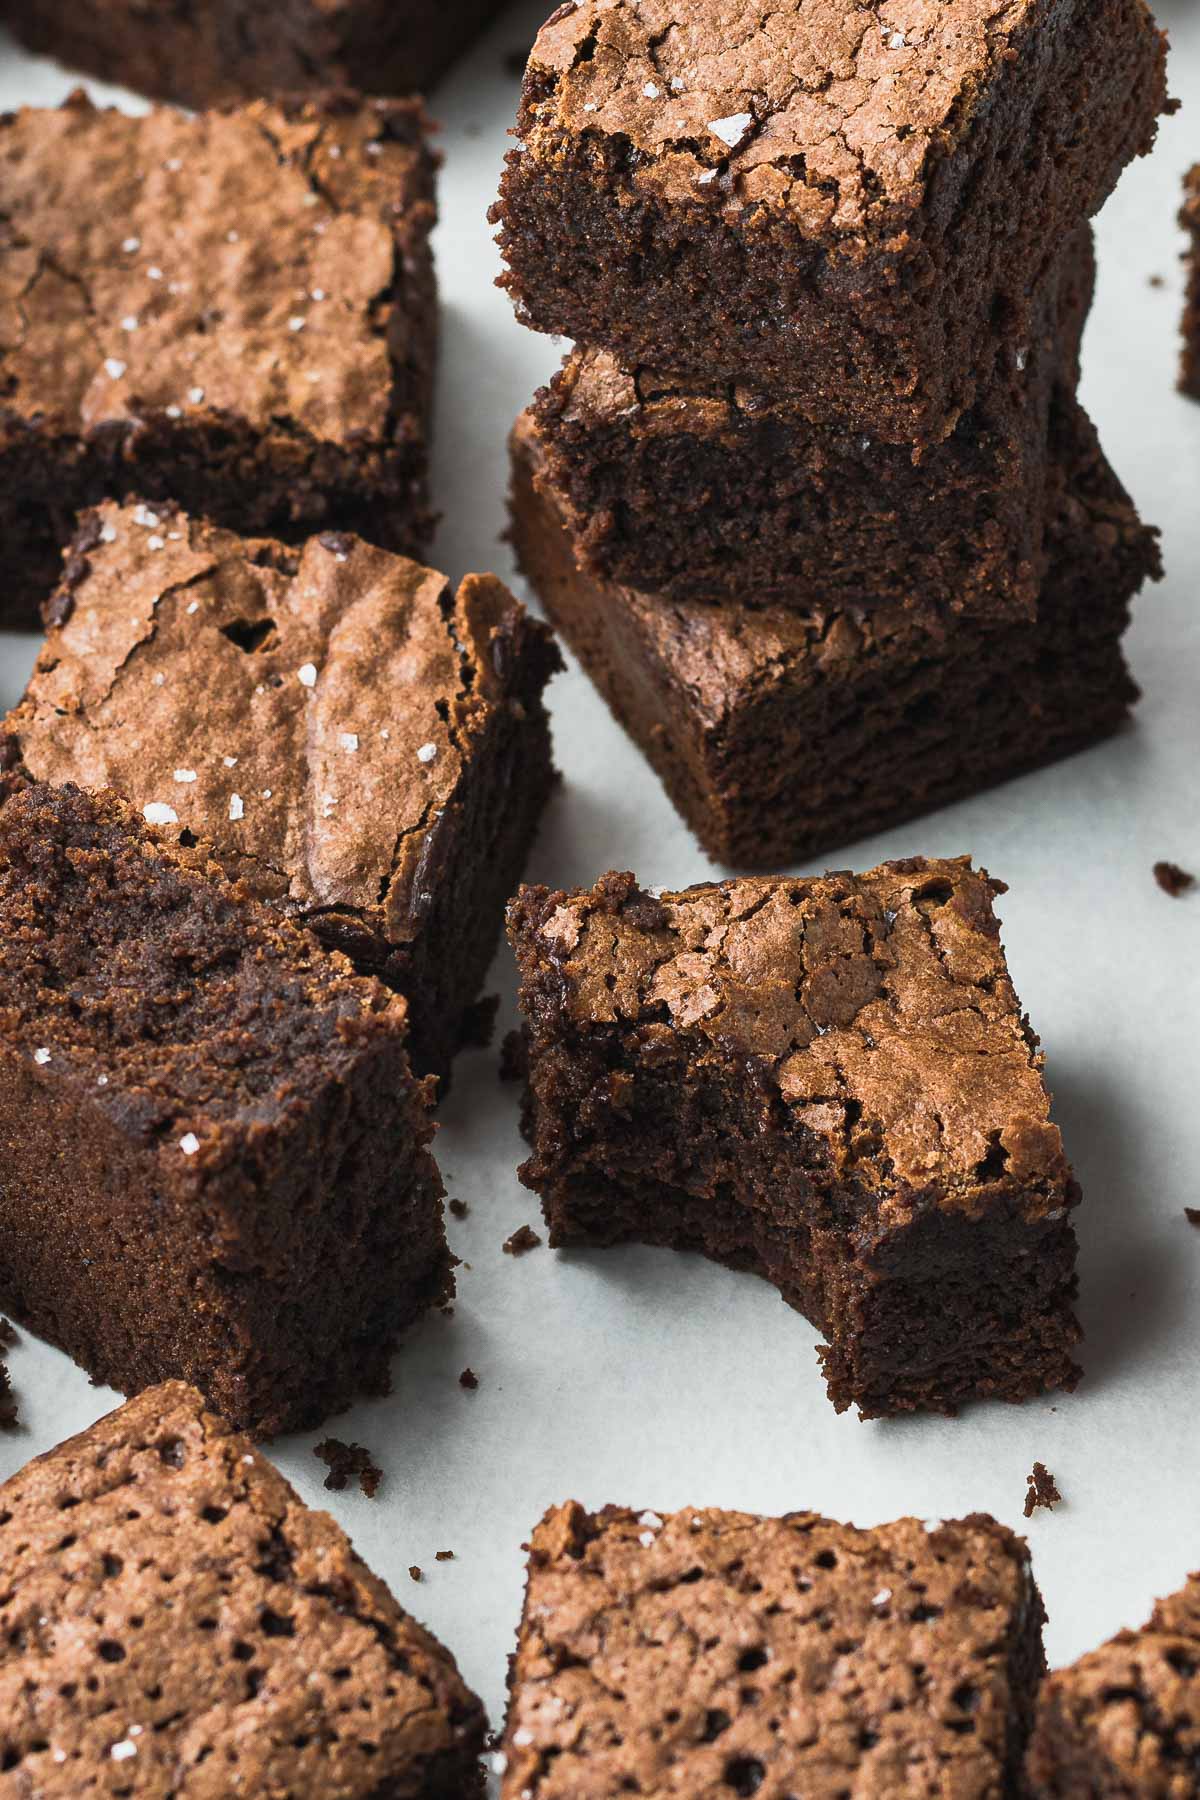 Chocolate brownies spread out on baking parchment